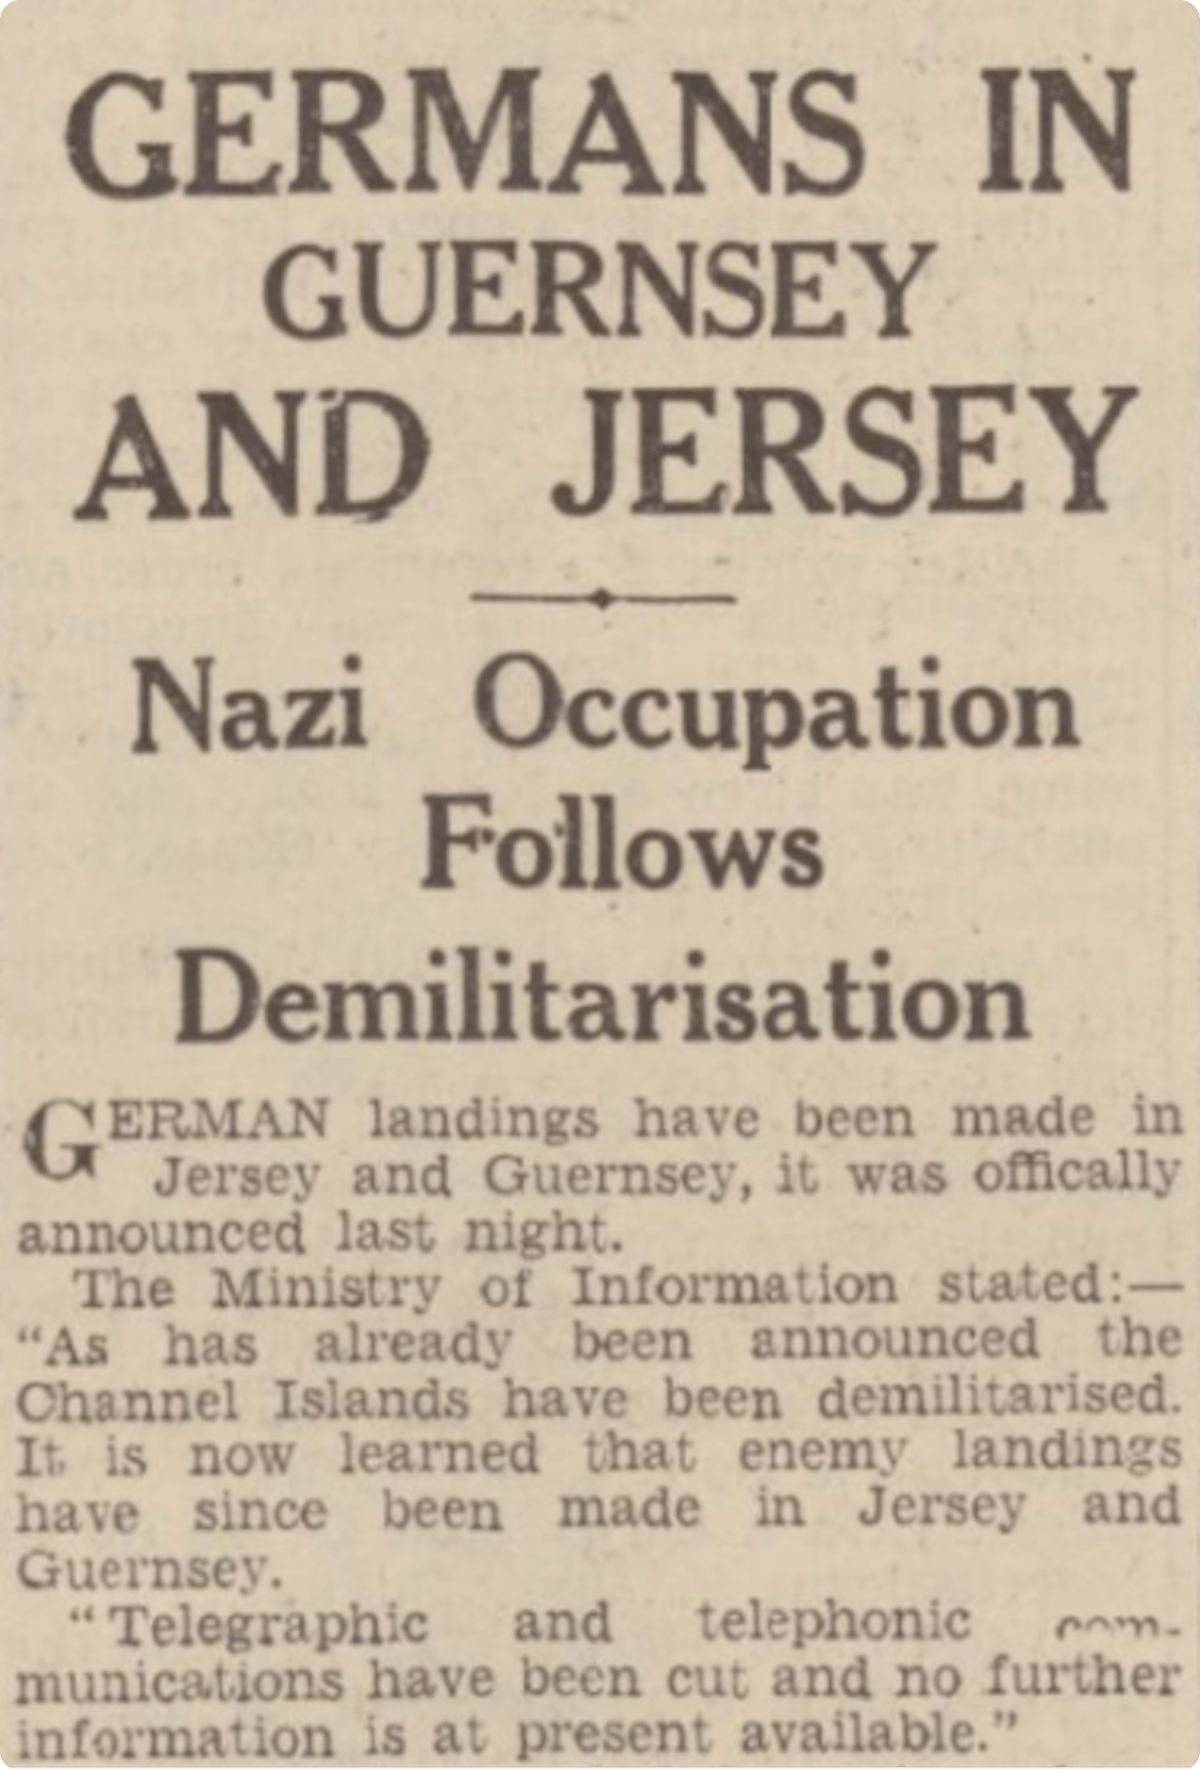 The Nazis occupy Guernsey and Jersey, 1940